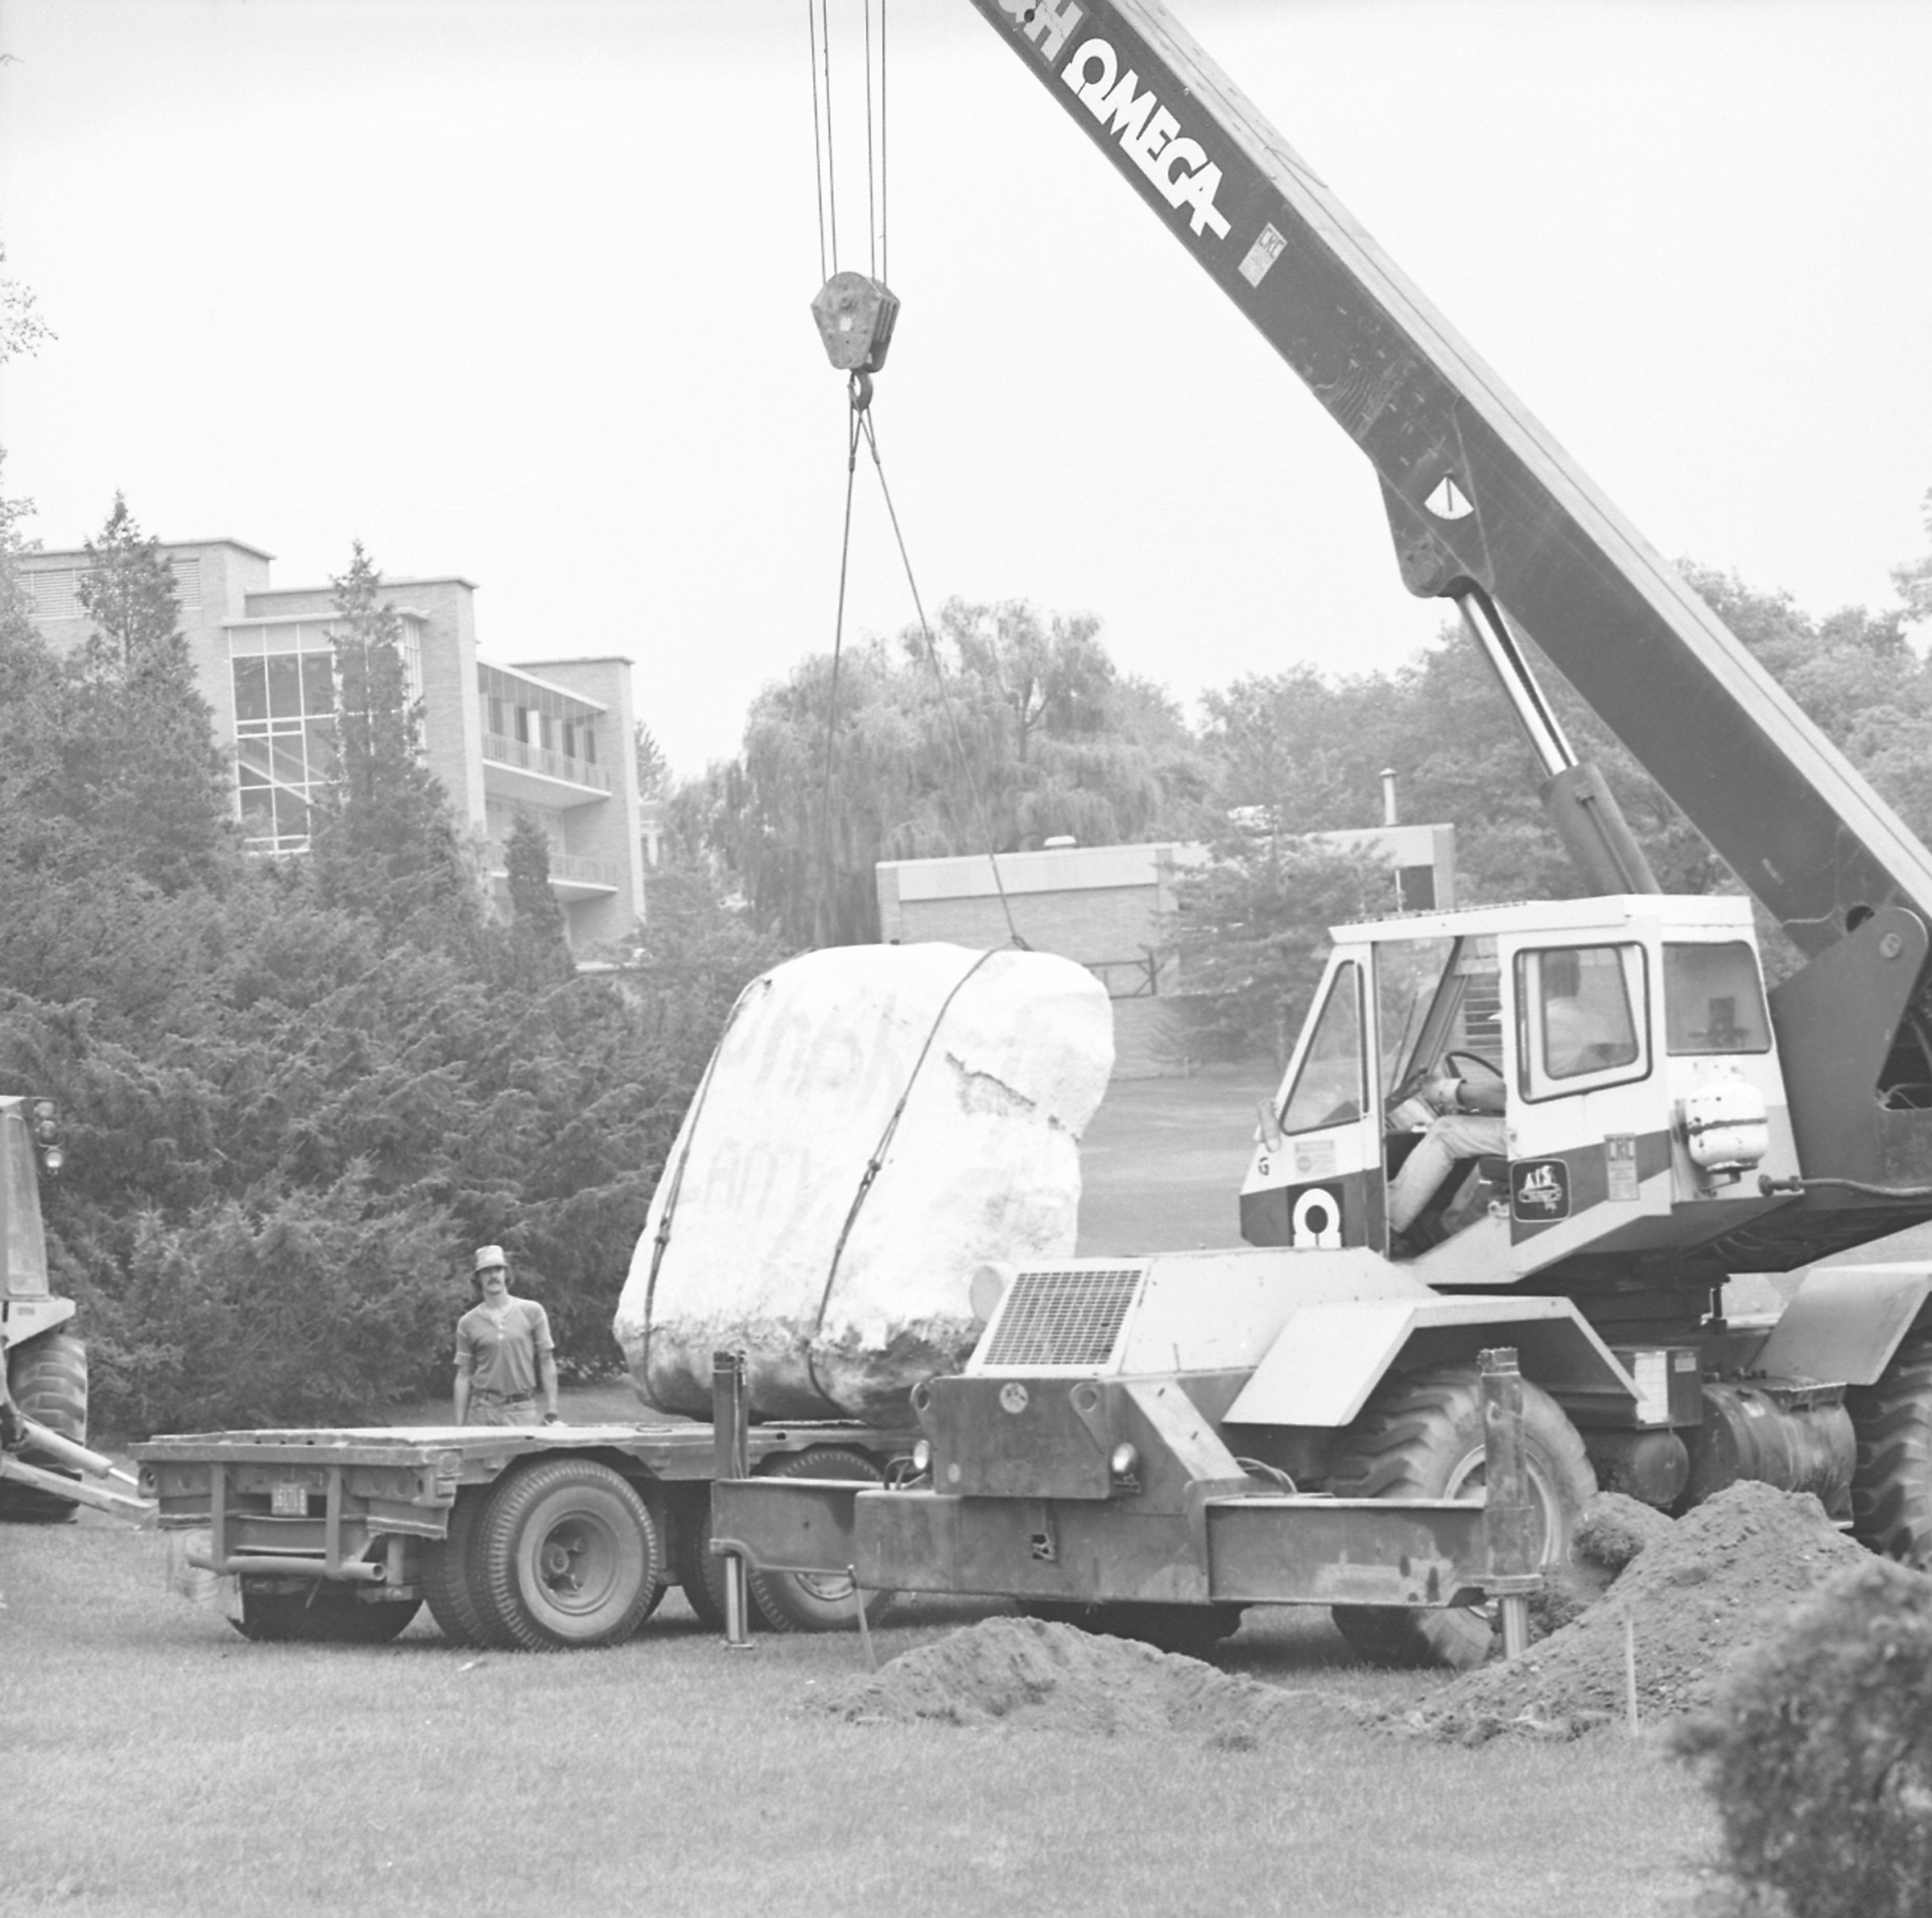 The Rock being Moved, September 17, 1985